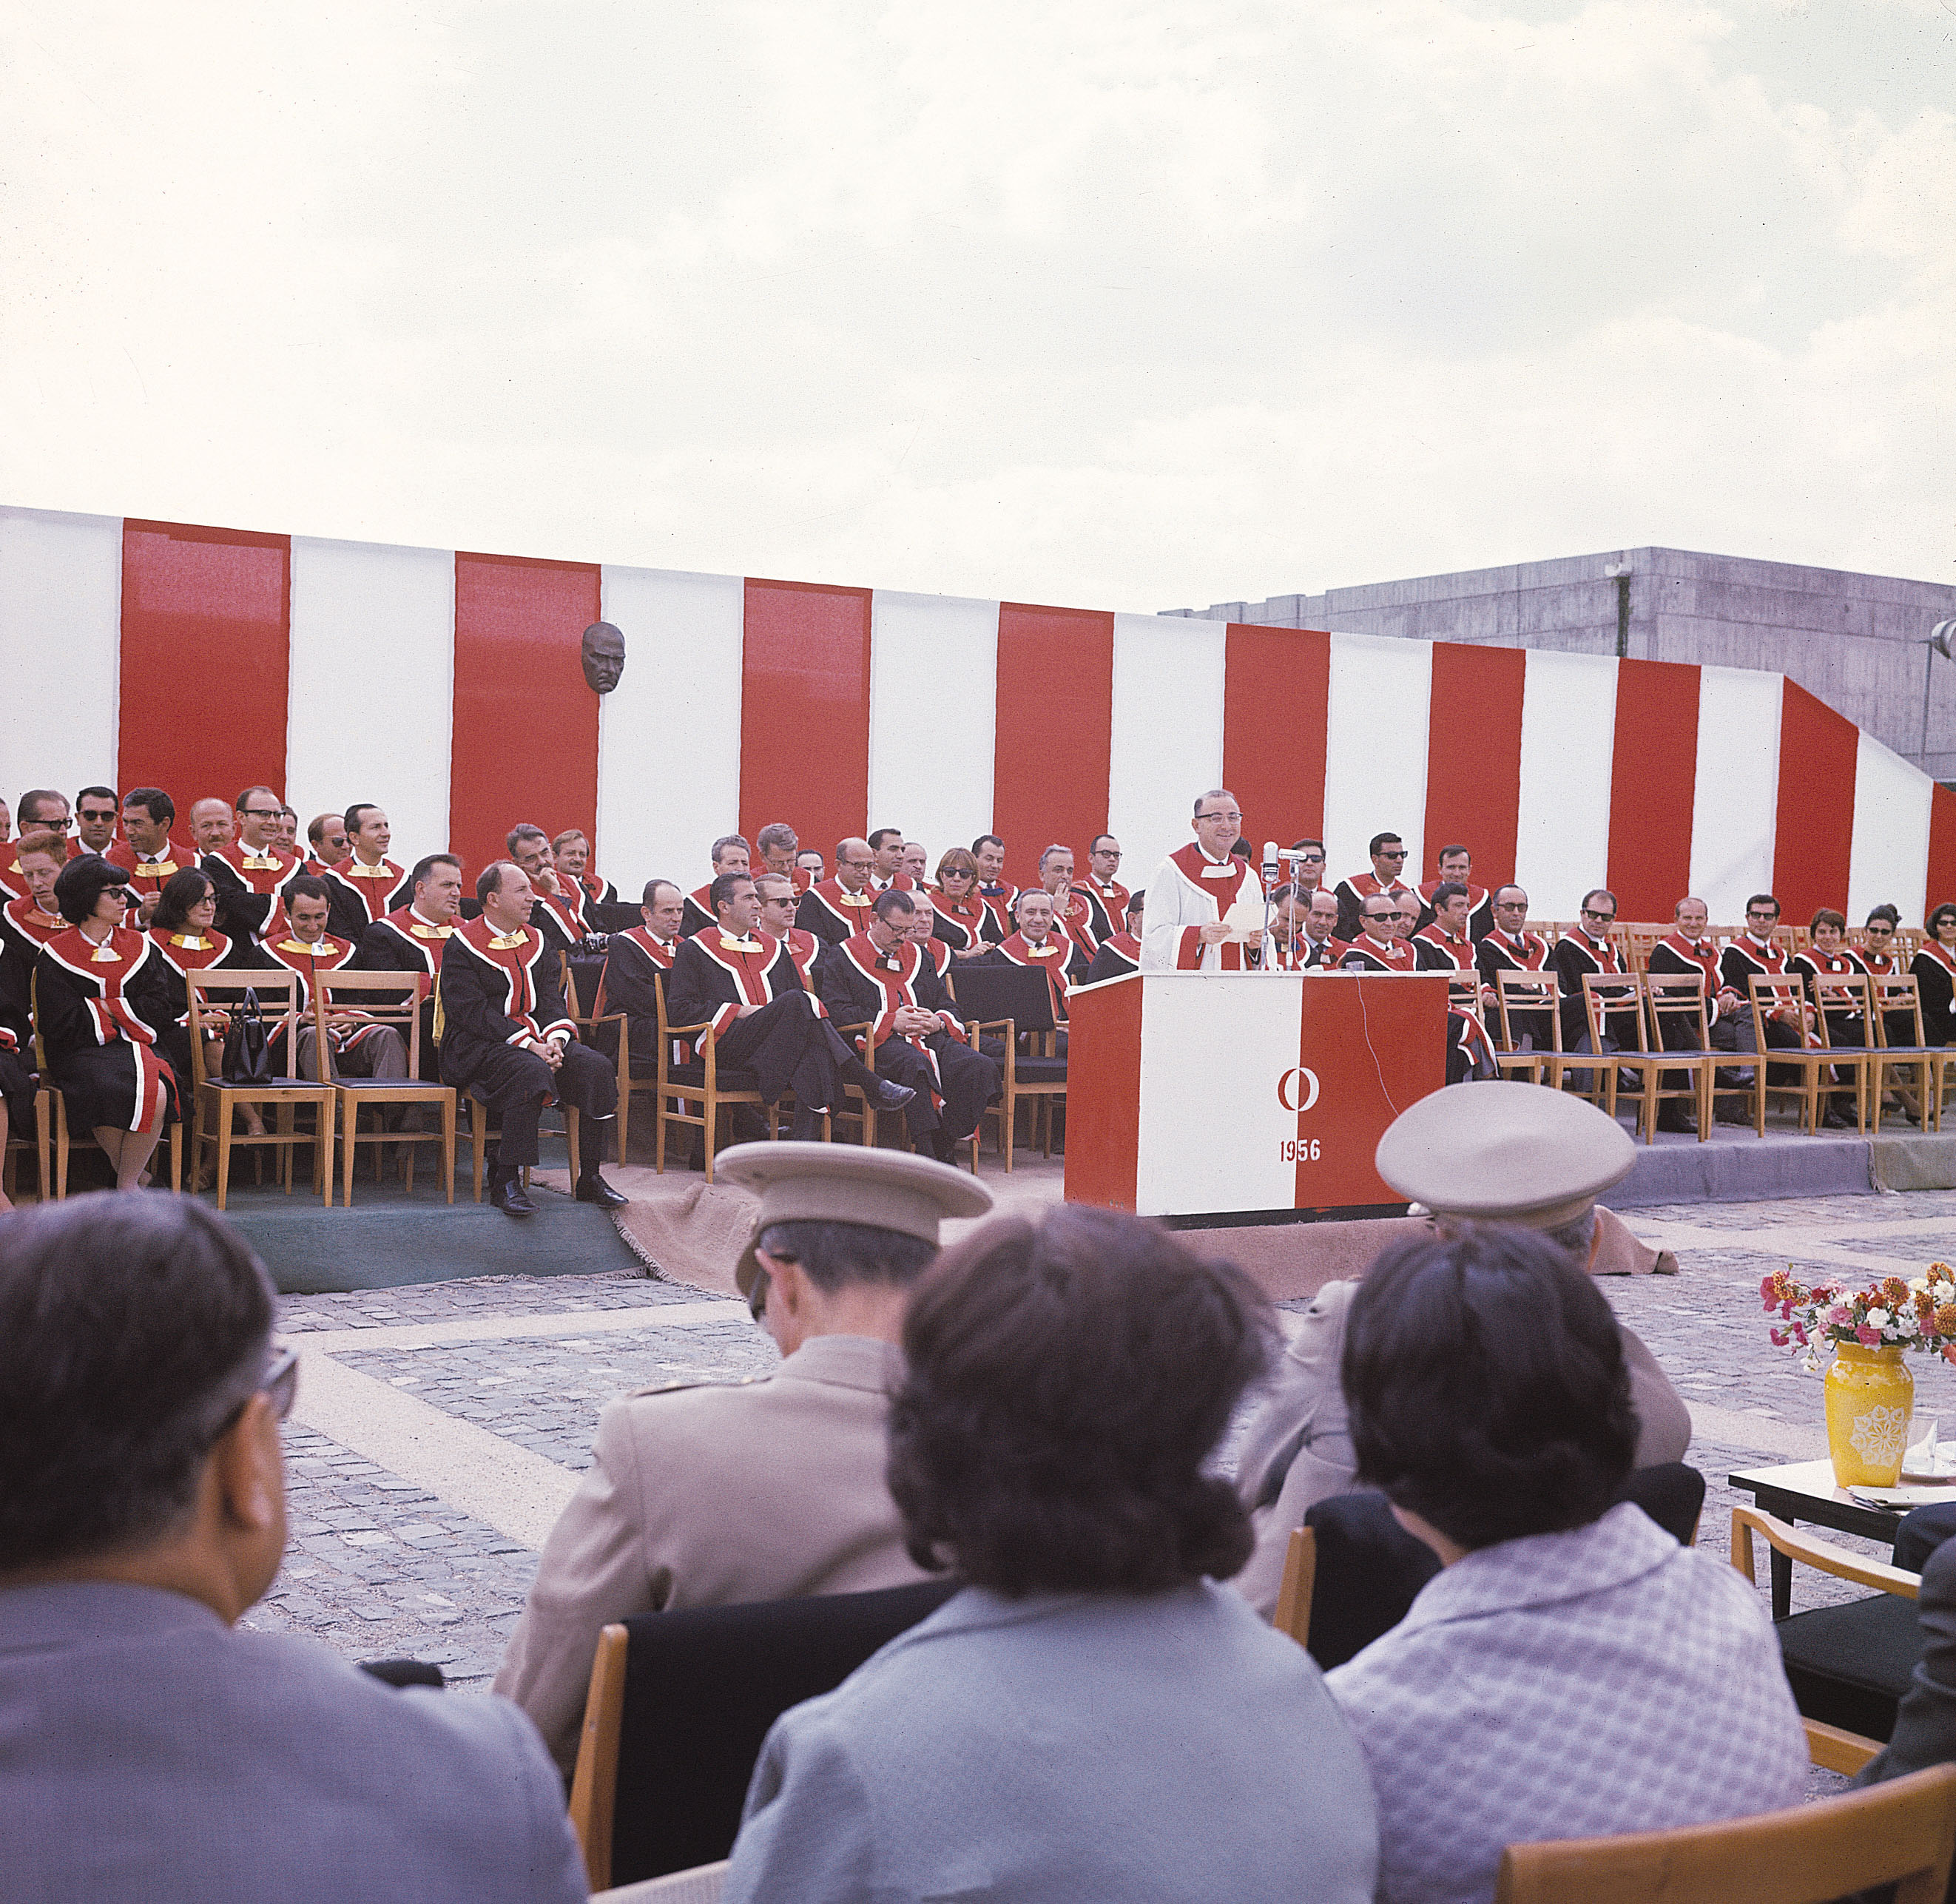 Images of the METU Graduation ceremony held with the participation of soldiers and other visitors in the 1960s